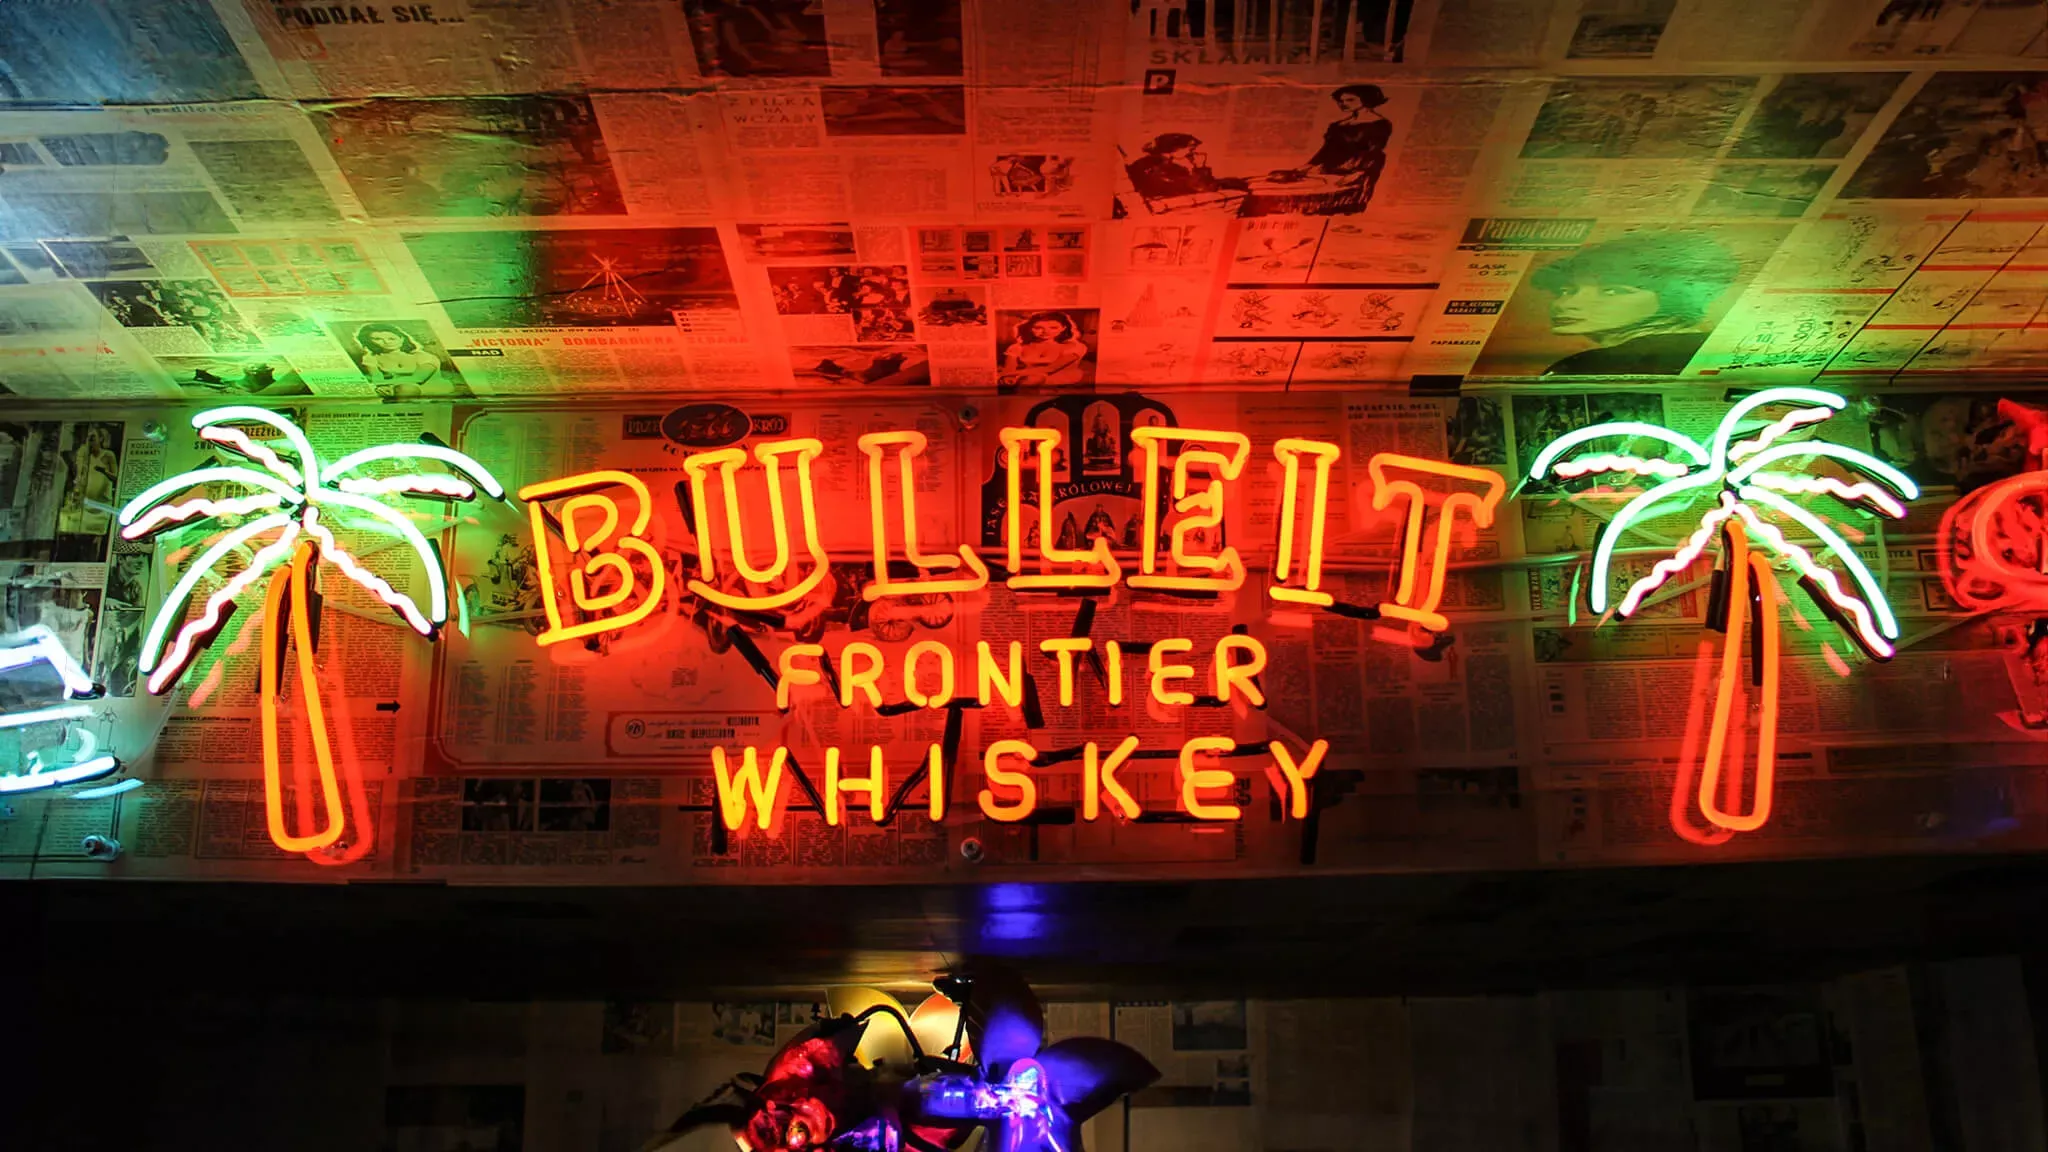 Bulleit - logo and lettering along with palms made of neon